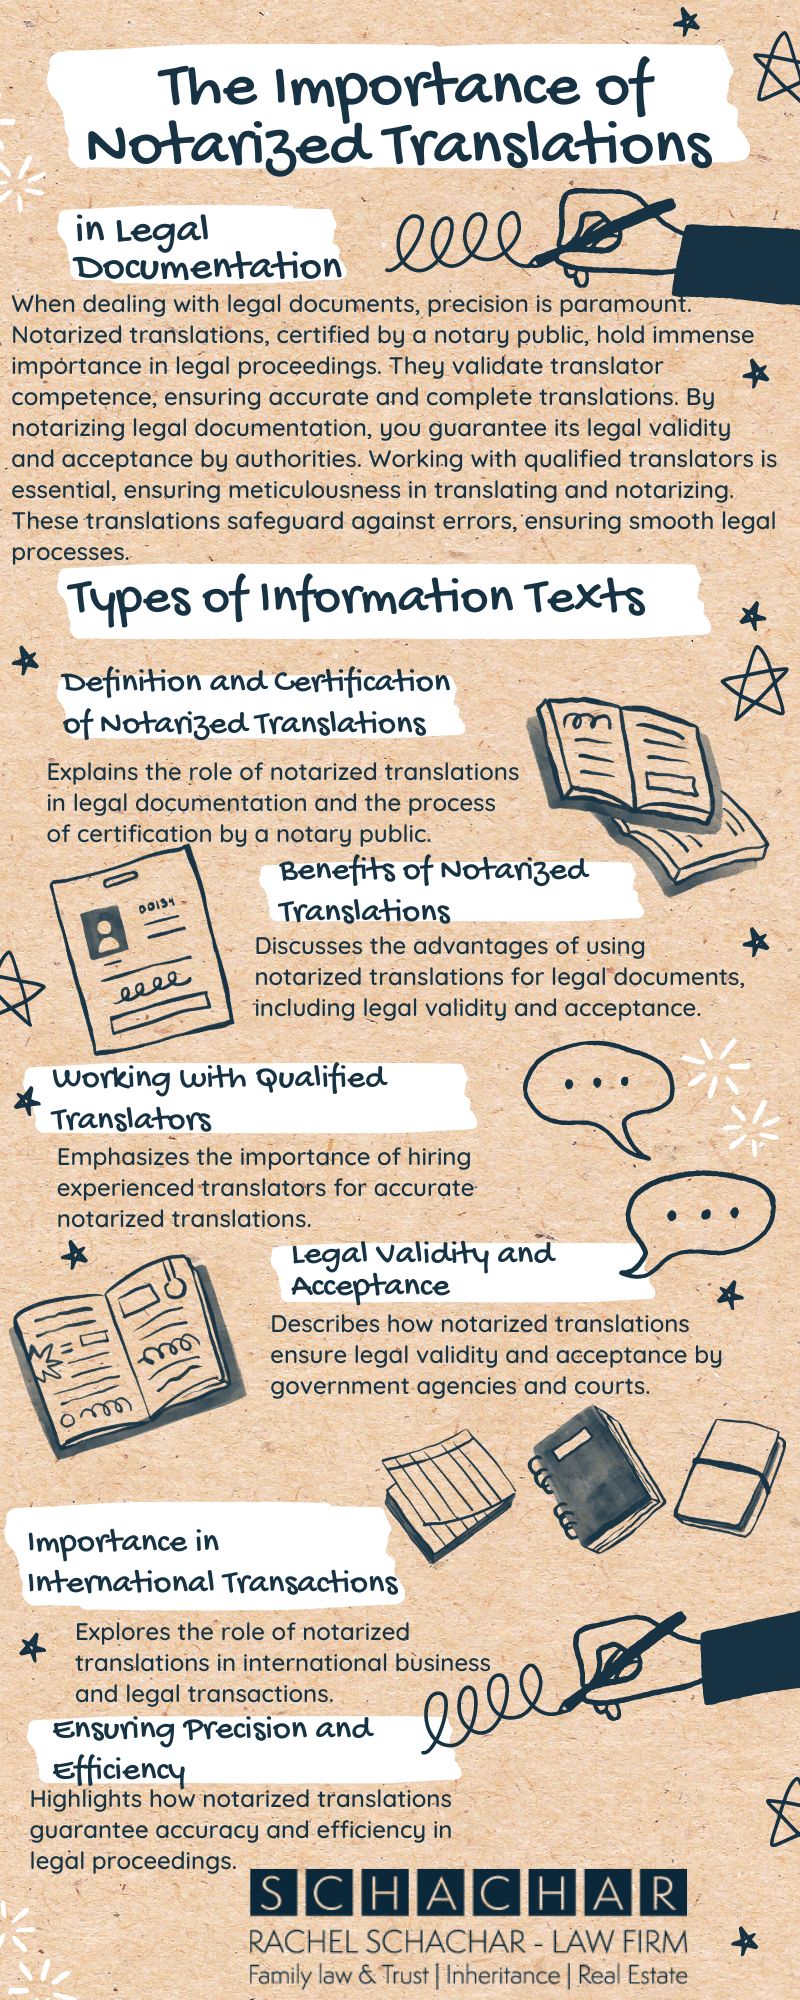 The Importance of Notarized Translations in Legal Documentation The Importance of Notarized Translations in Legal Documentation